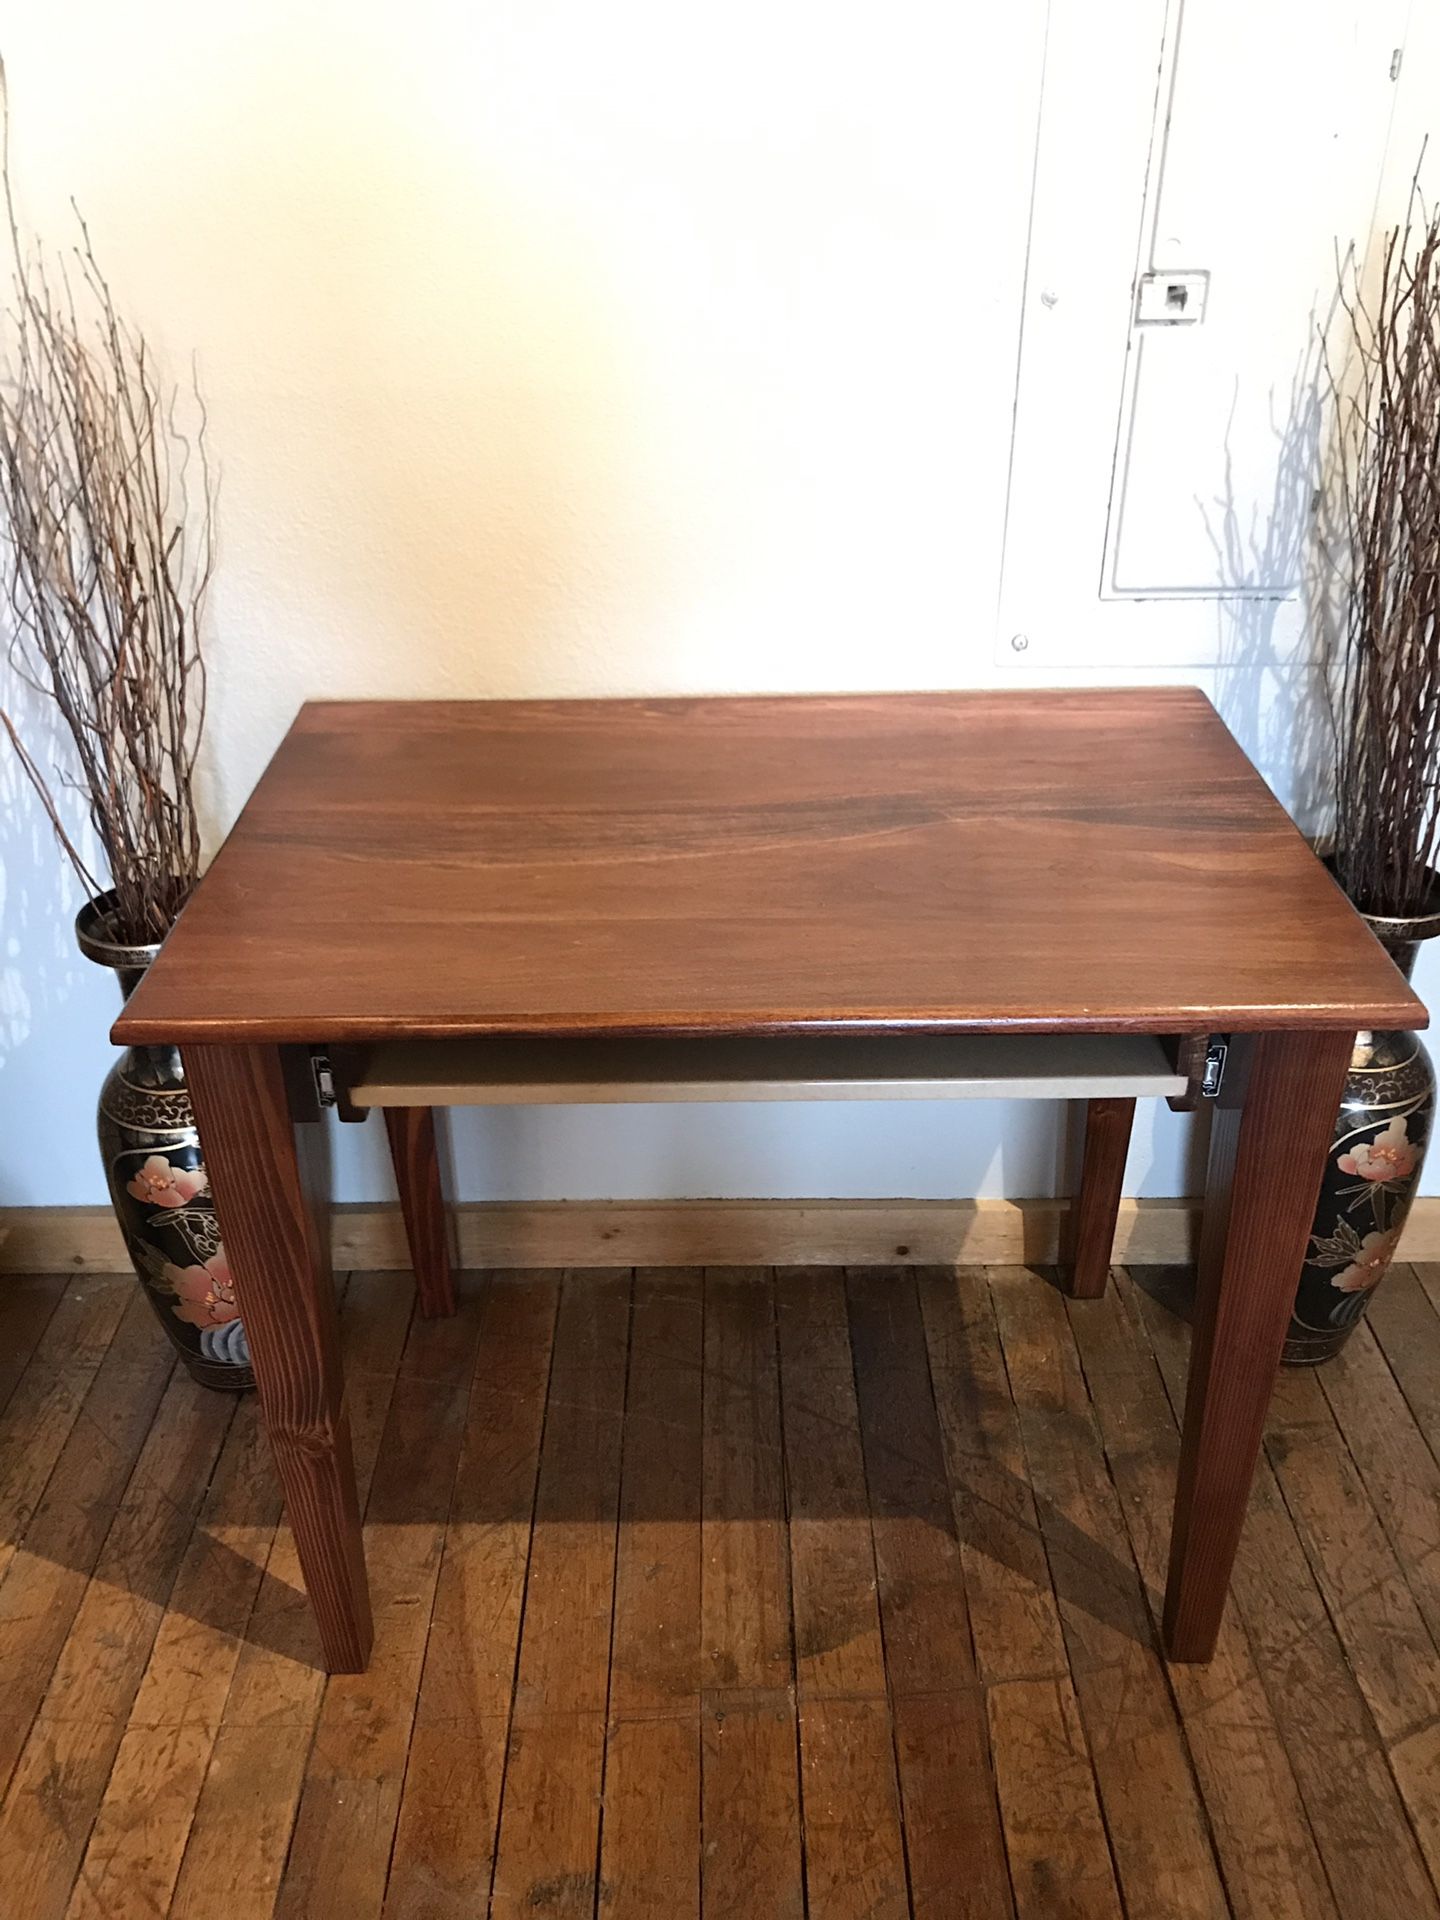 Wooden Desk with Drawer